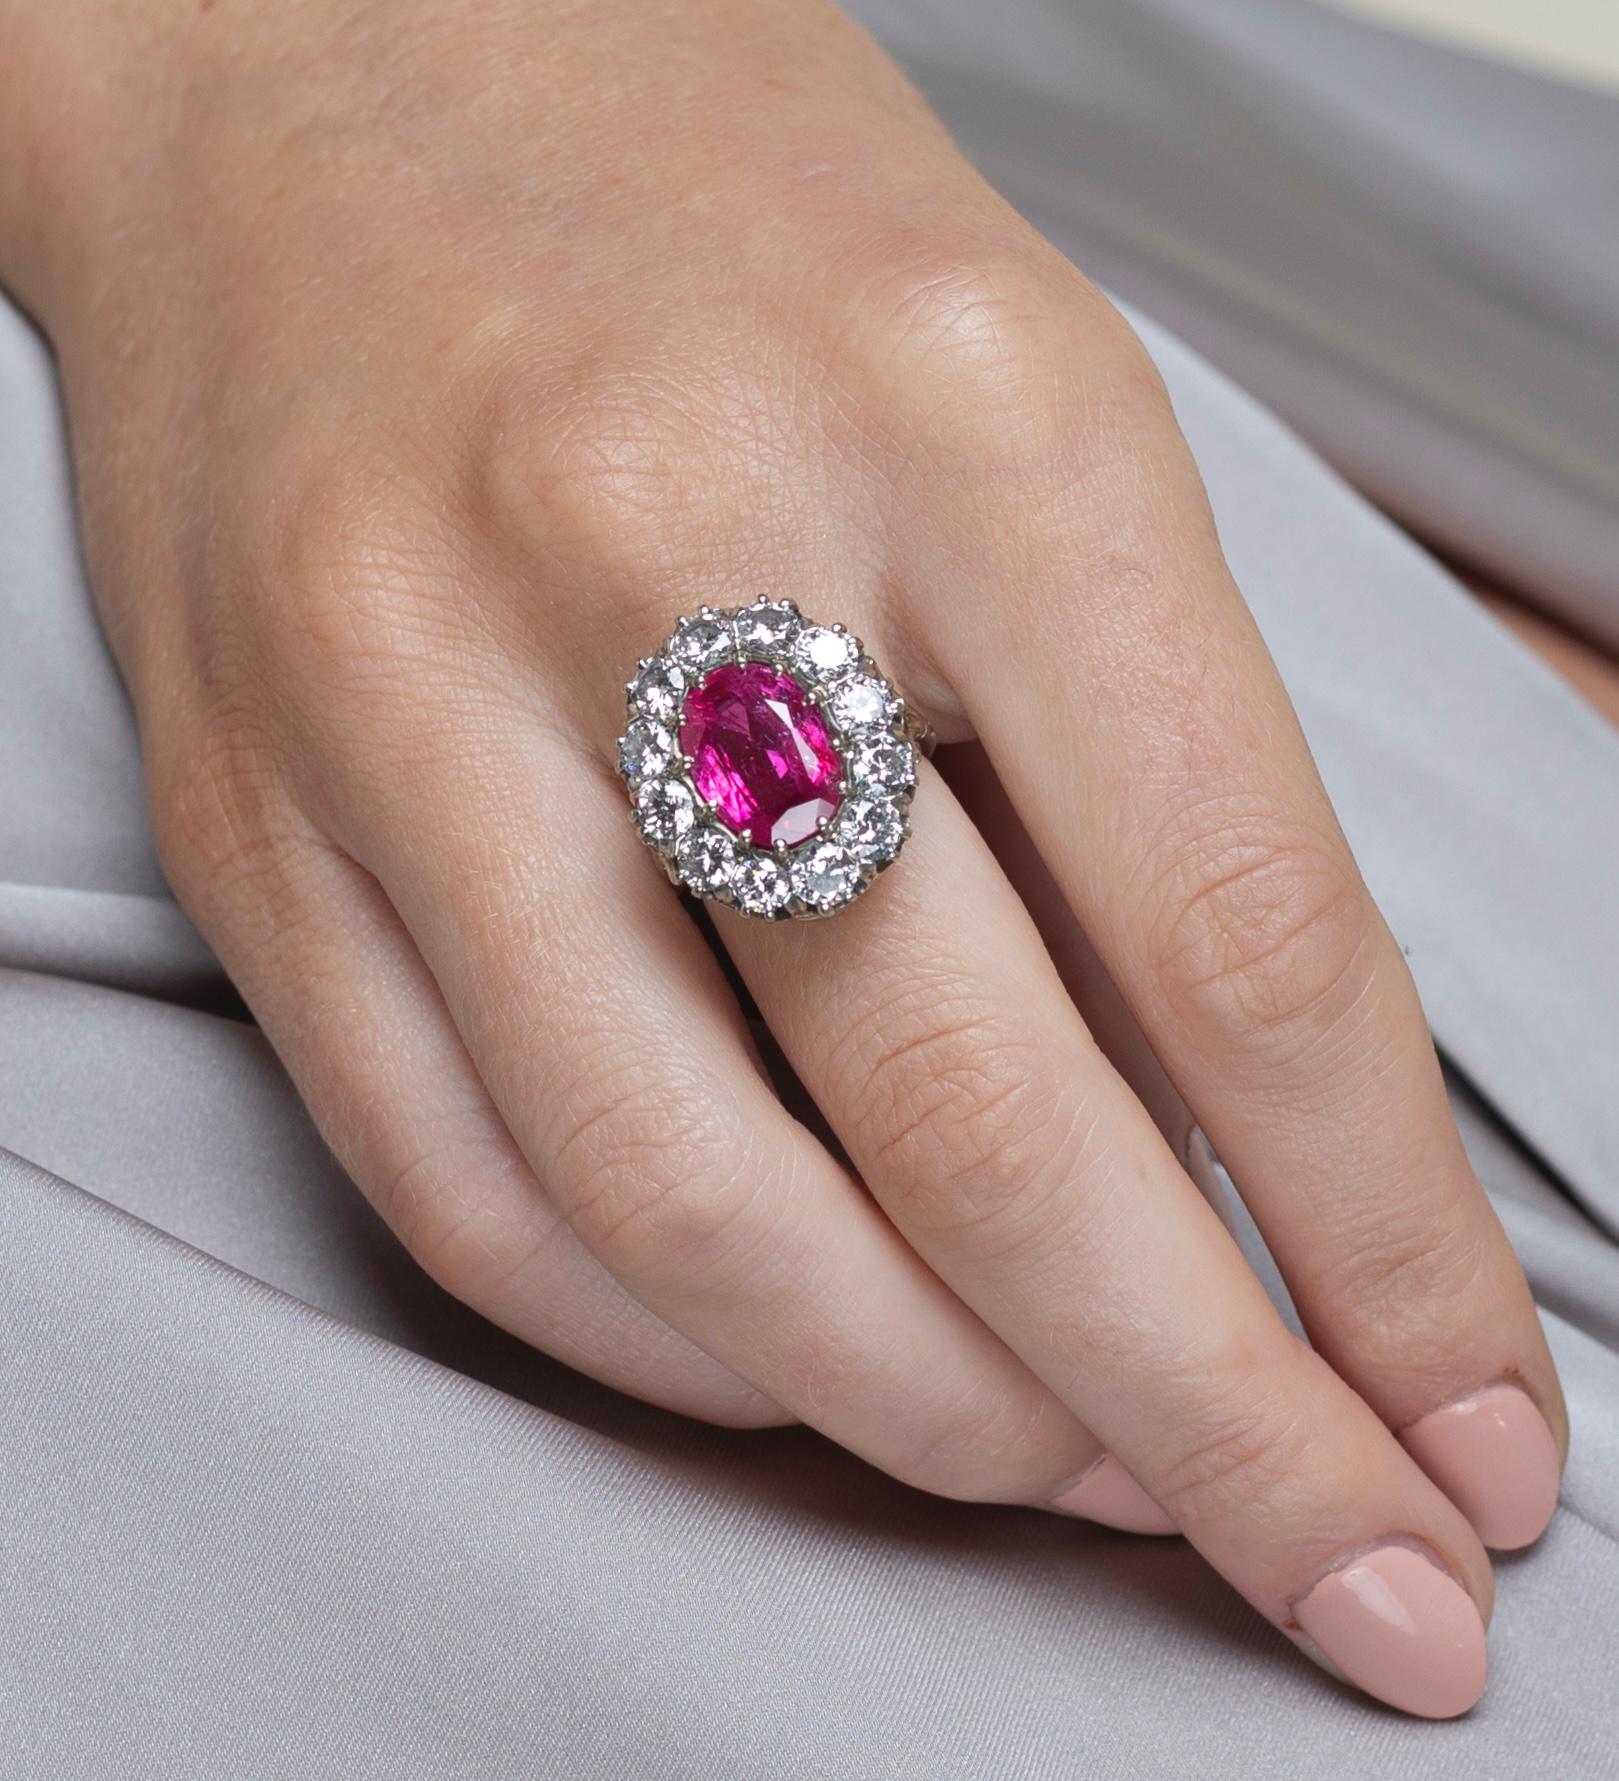 Art Deco AGL Certified 5.52 Carat No Heat Oval Cut Burma Ruby and Round Diamond Ring For Sale